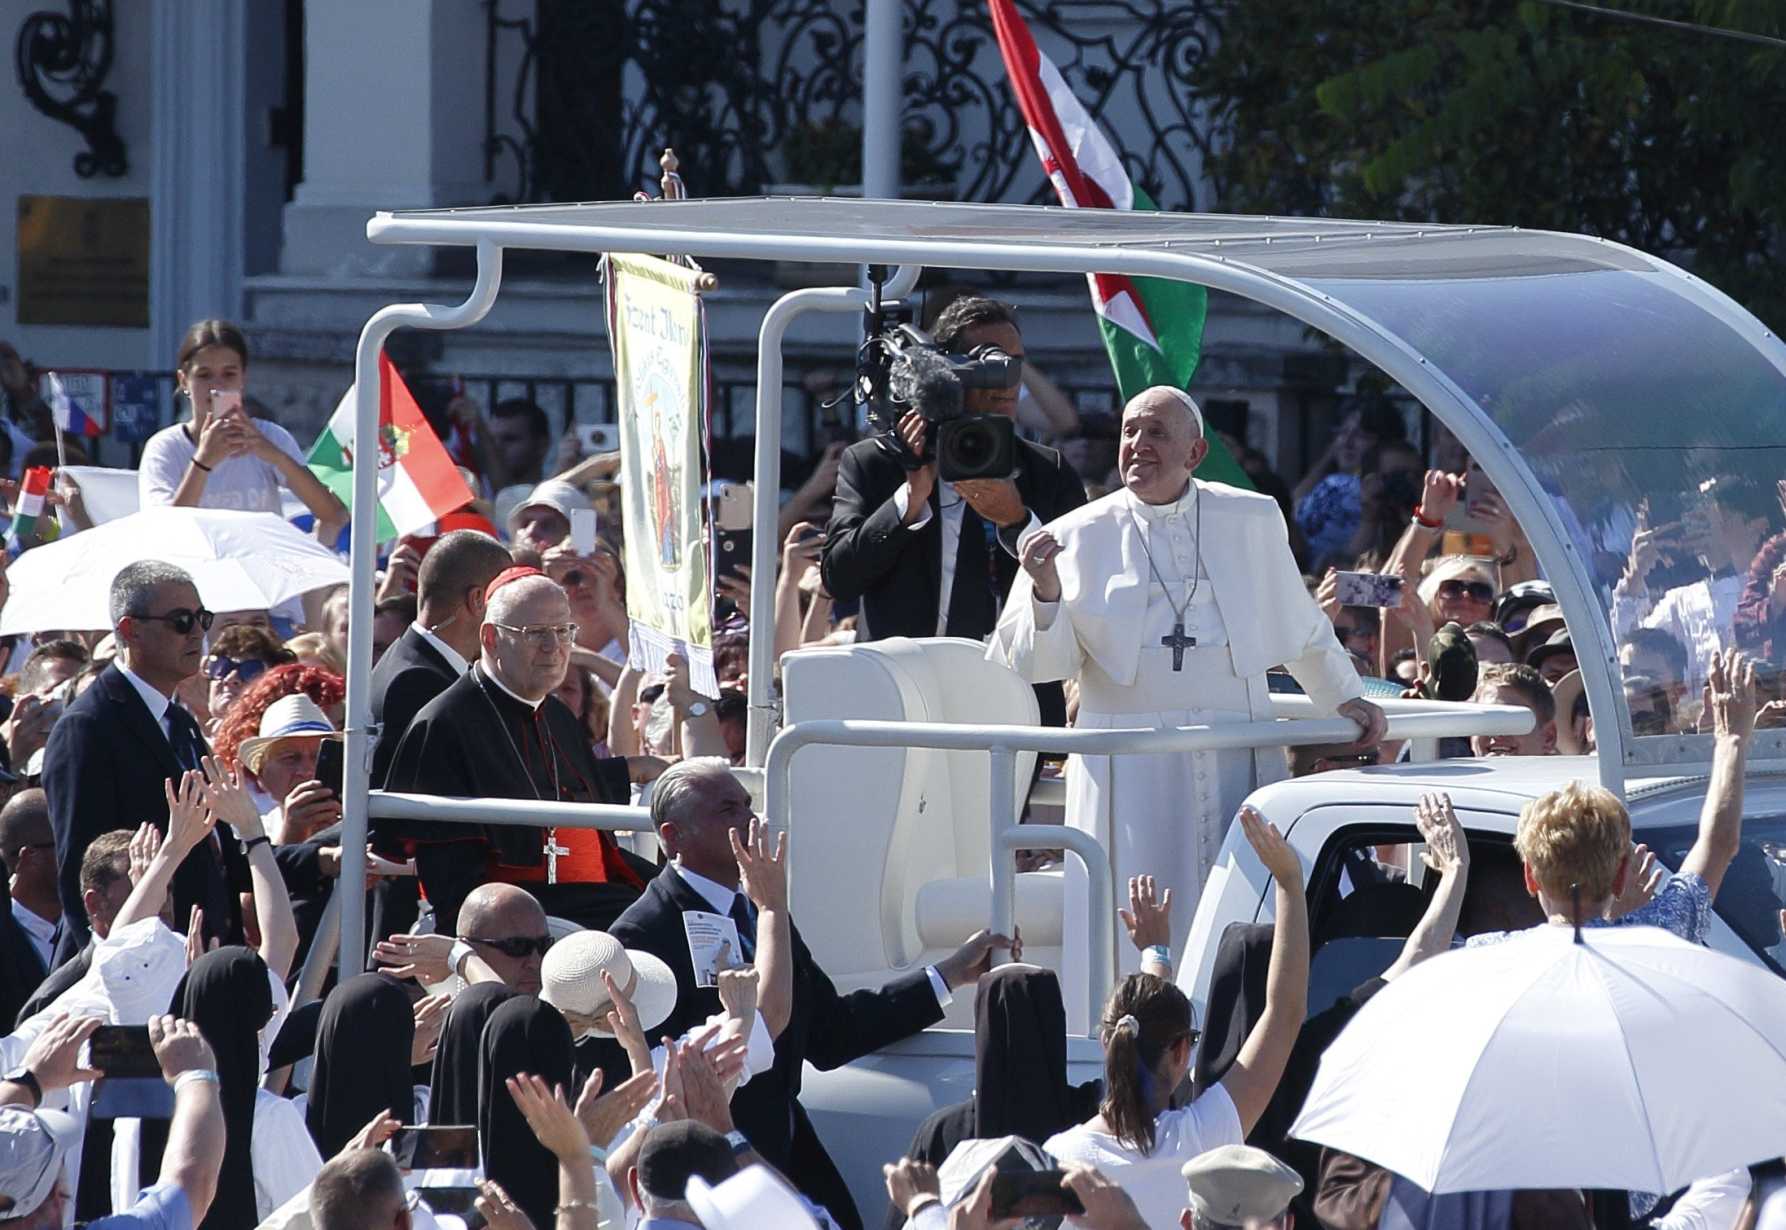 Pope Francis will travel to Hungary at the end of April